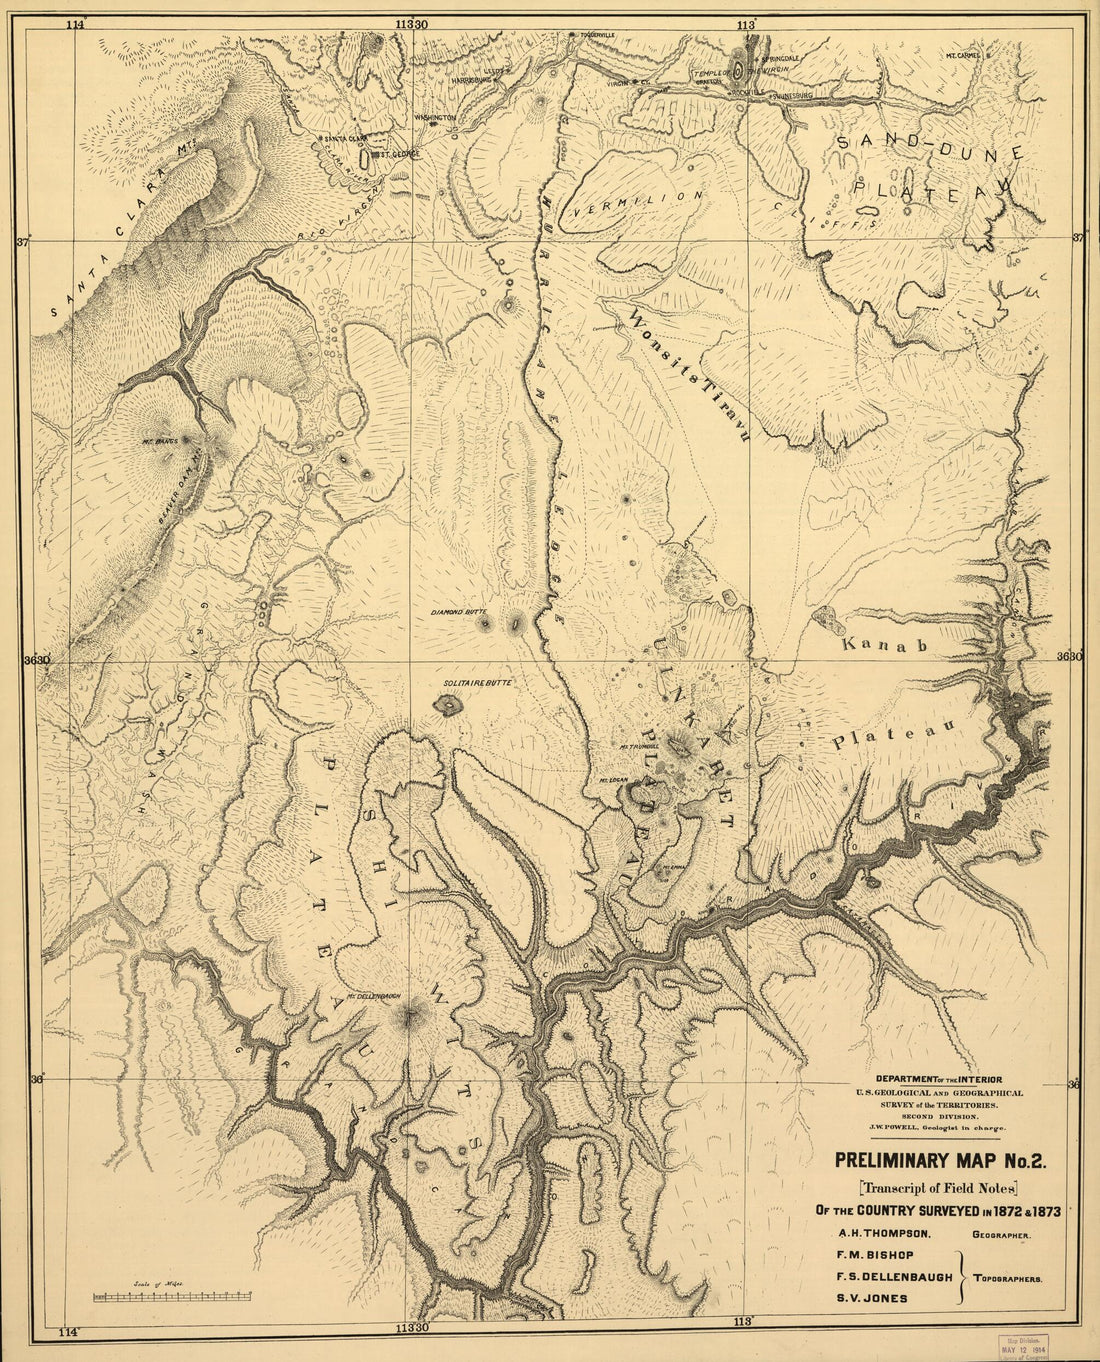 This old map of Preliminary Map No.2 of the Country Surveyed In from 1872 and 1873 was created by Francis Marion Bishop, Frederick Samuel Dellenbaugh,  Geological and Geographical Survey of the Territories (U.S.), S. V. Jones, John Wesley Powell, A. H. (